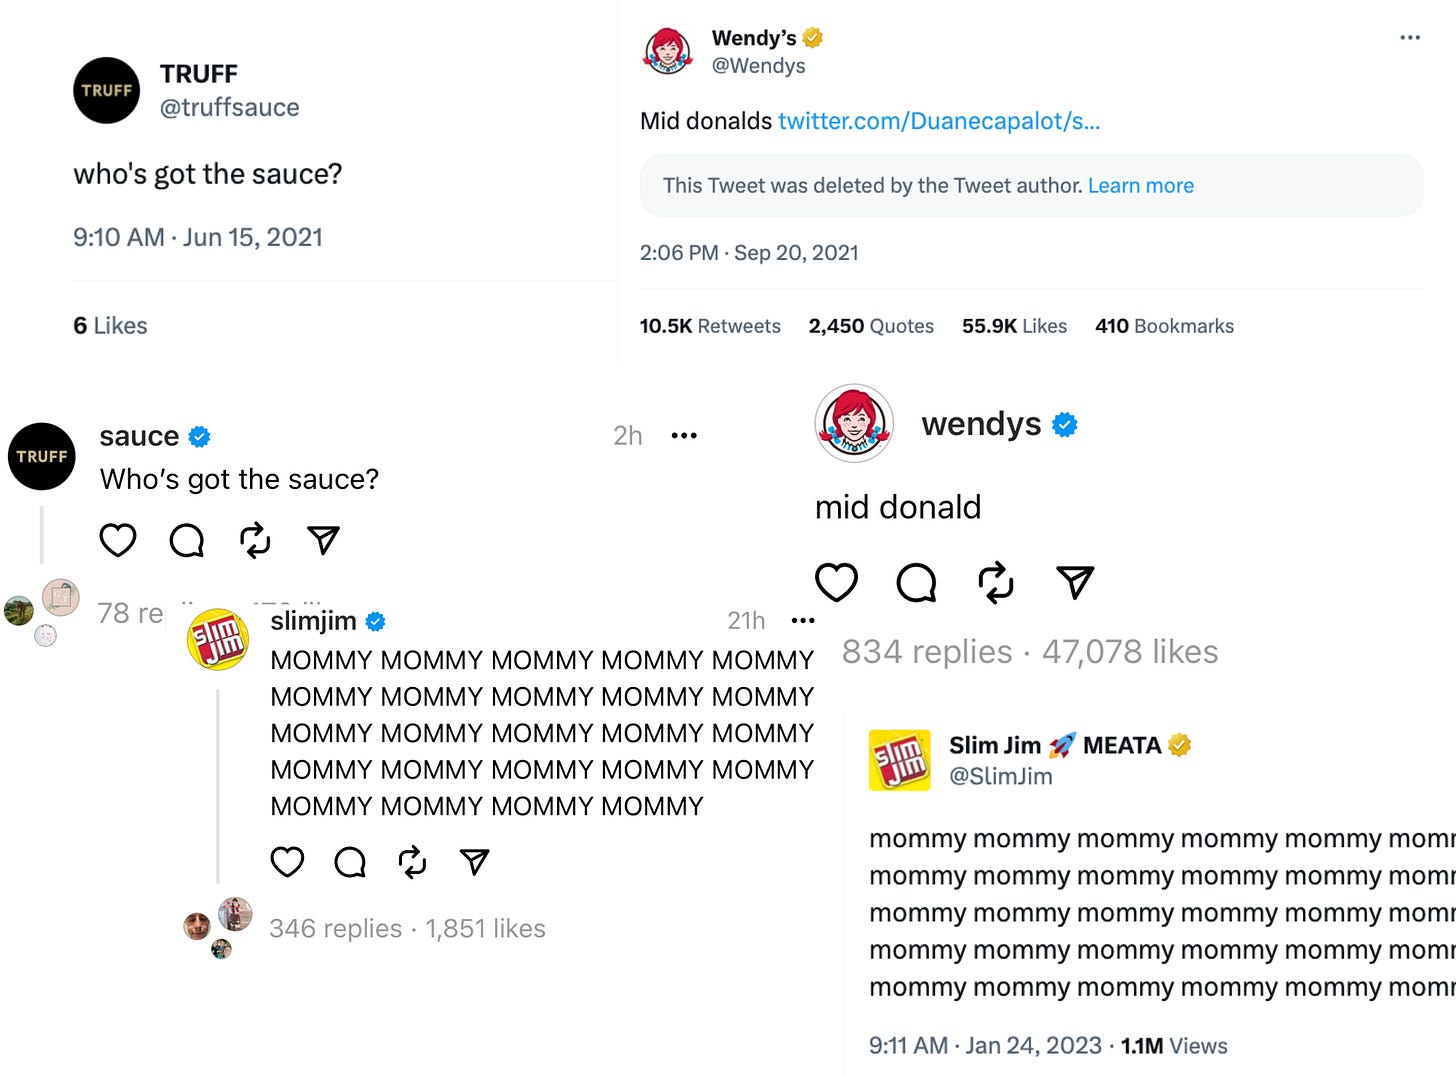 Examples of brands posting the same things on Twitter and Threads.